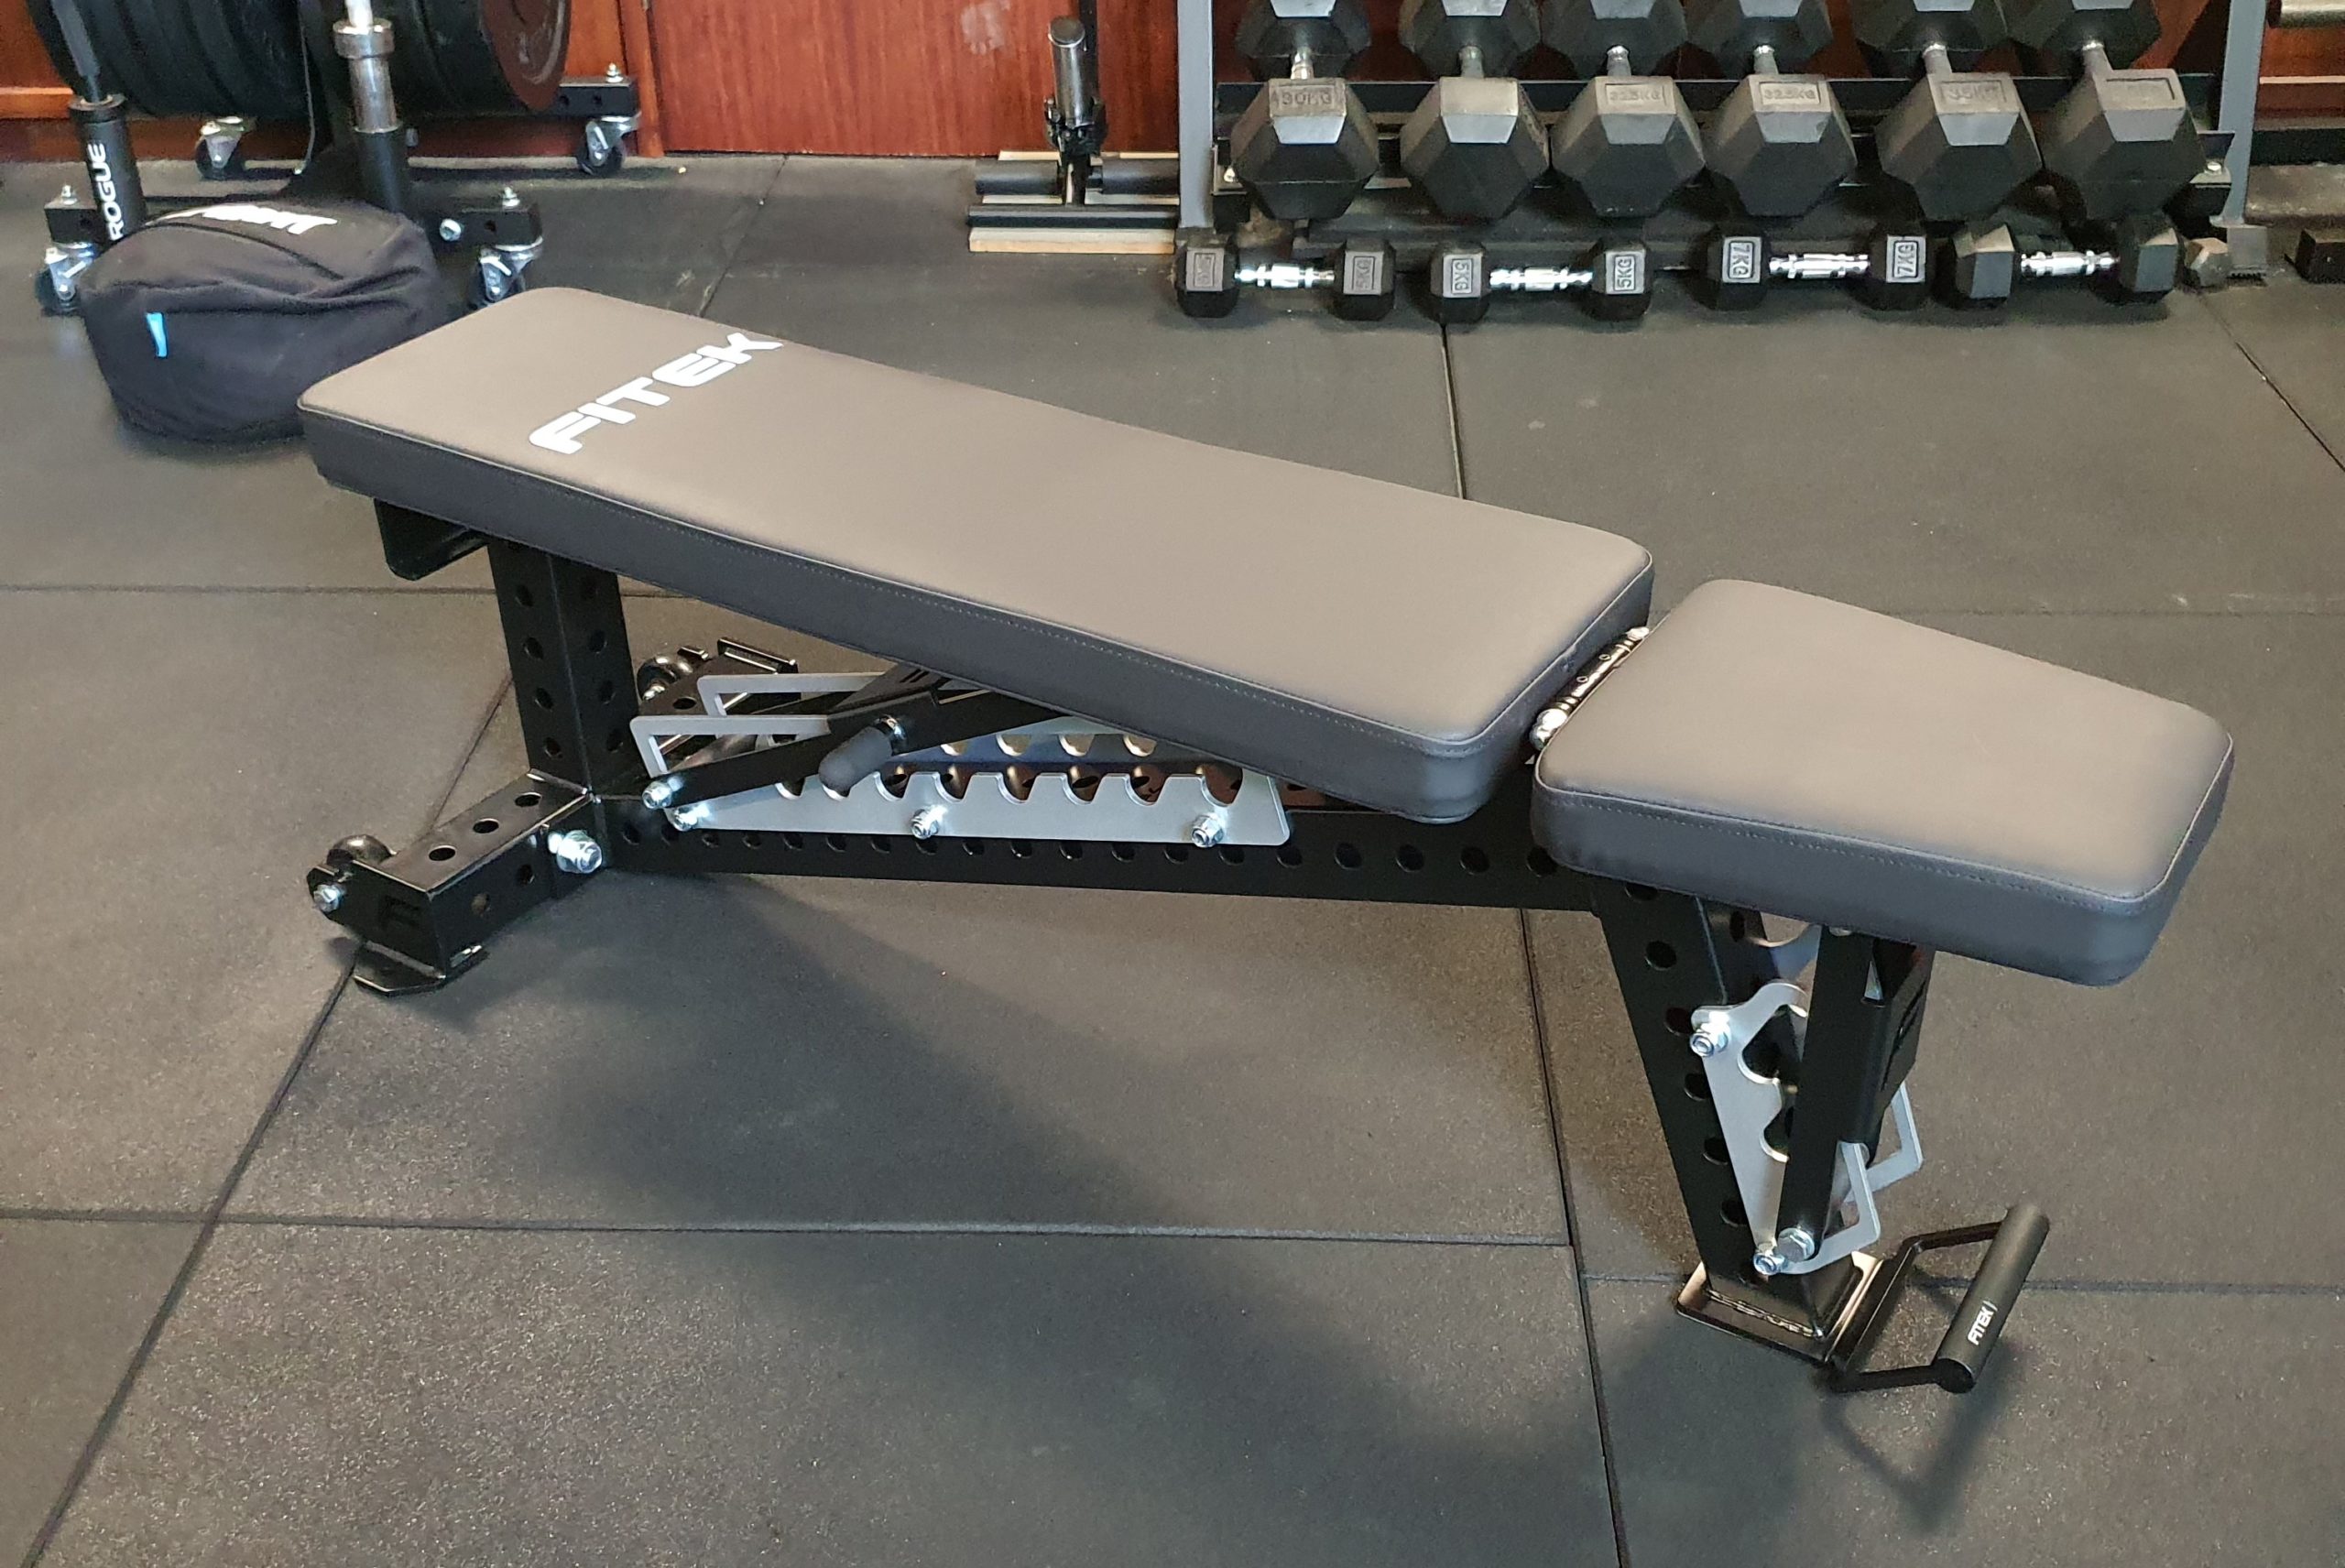 Fitek Elite Adjustable Bench 3.0 Review: Best Quality Bench For Your Money